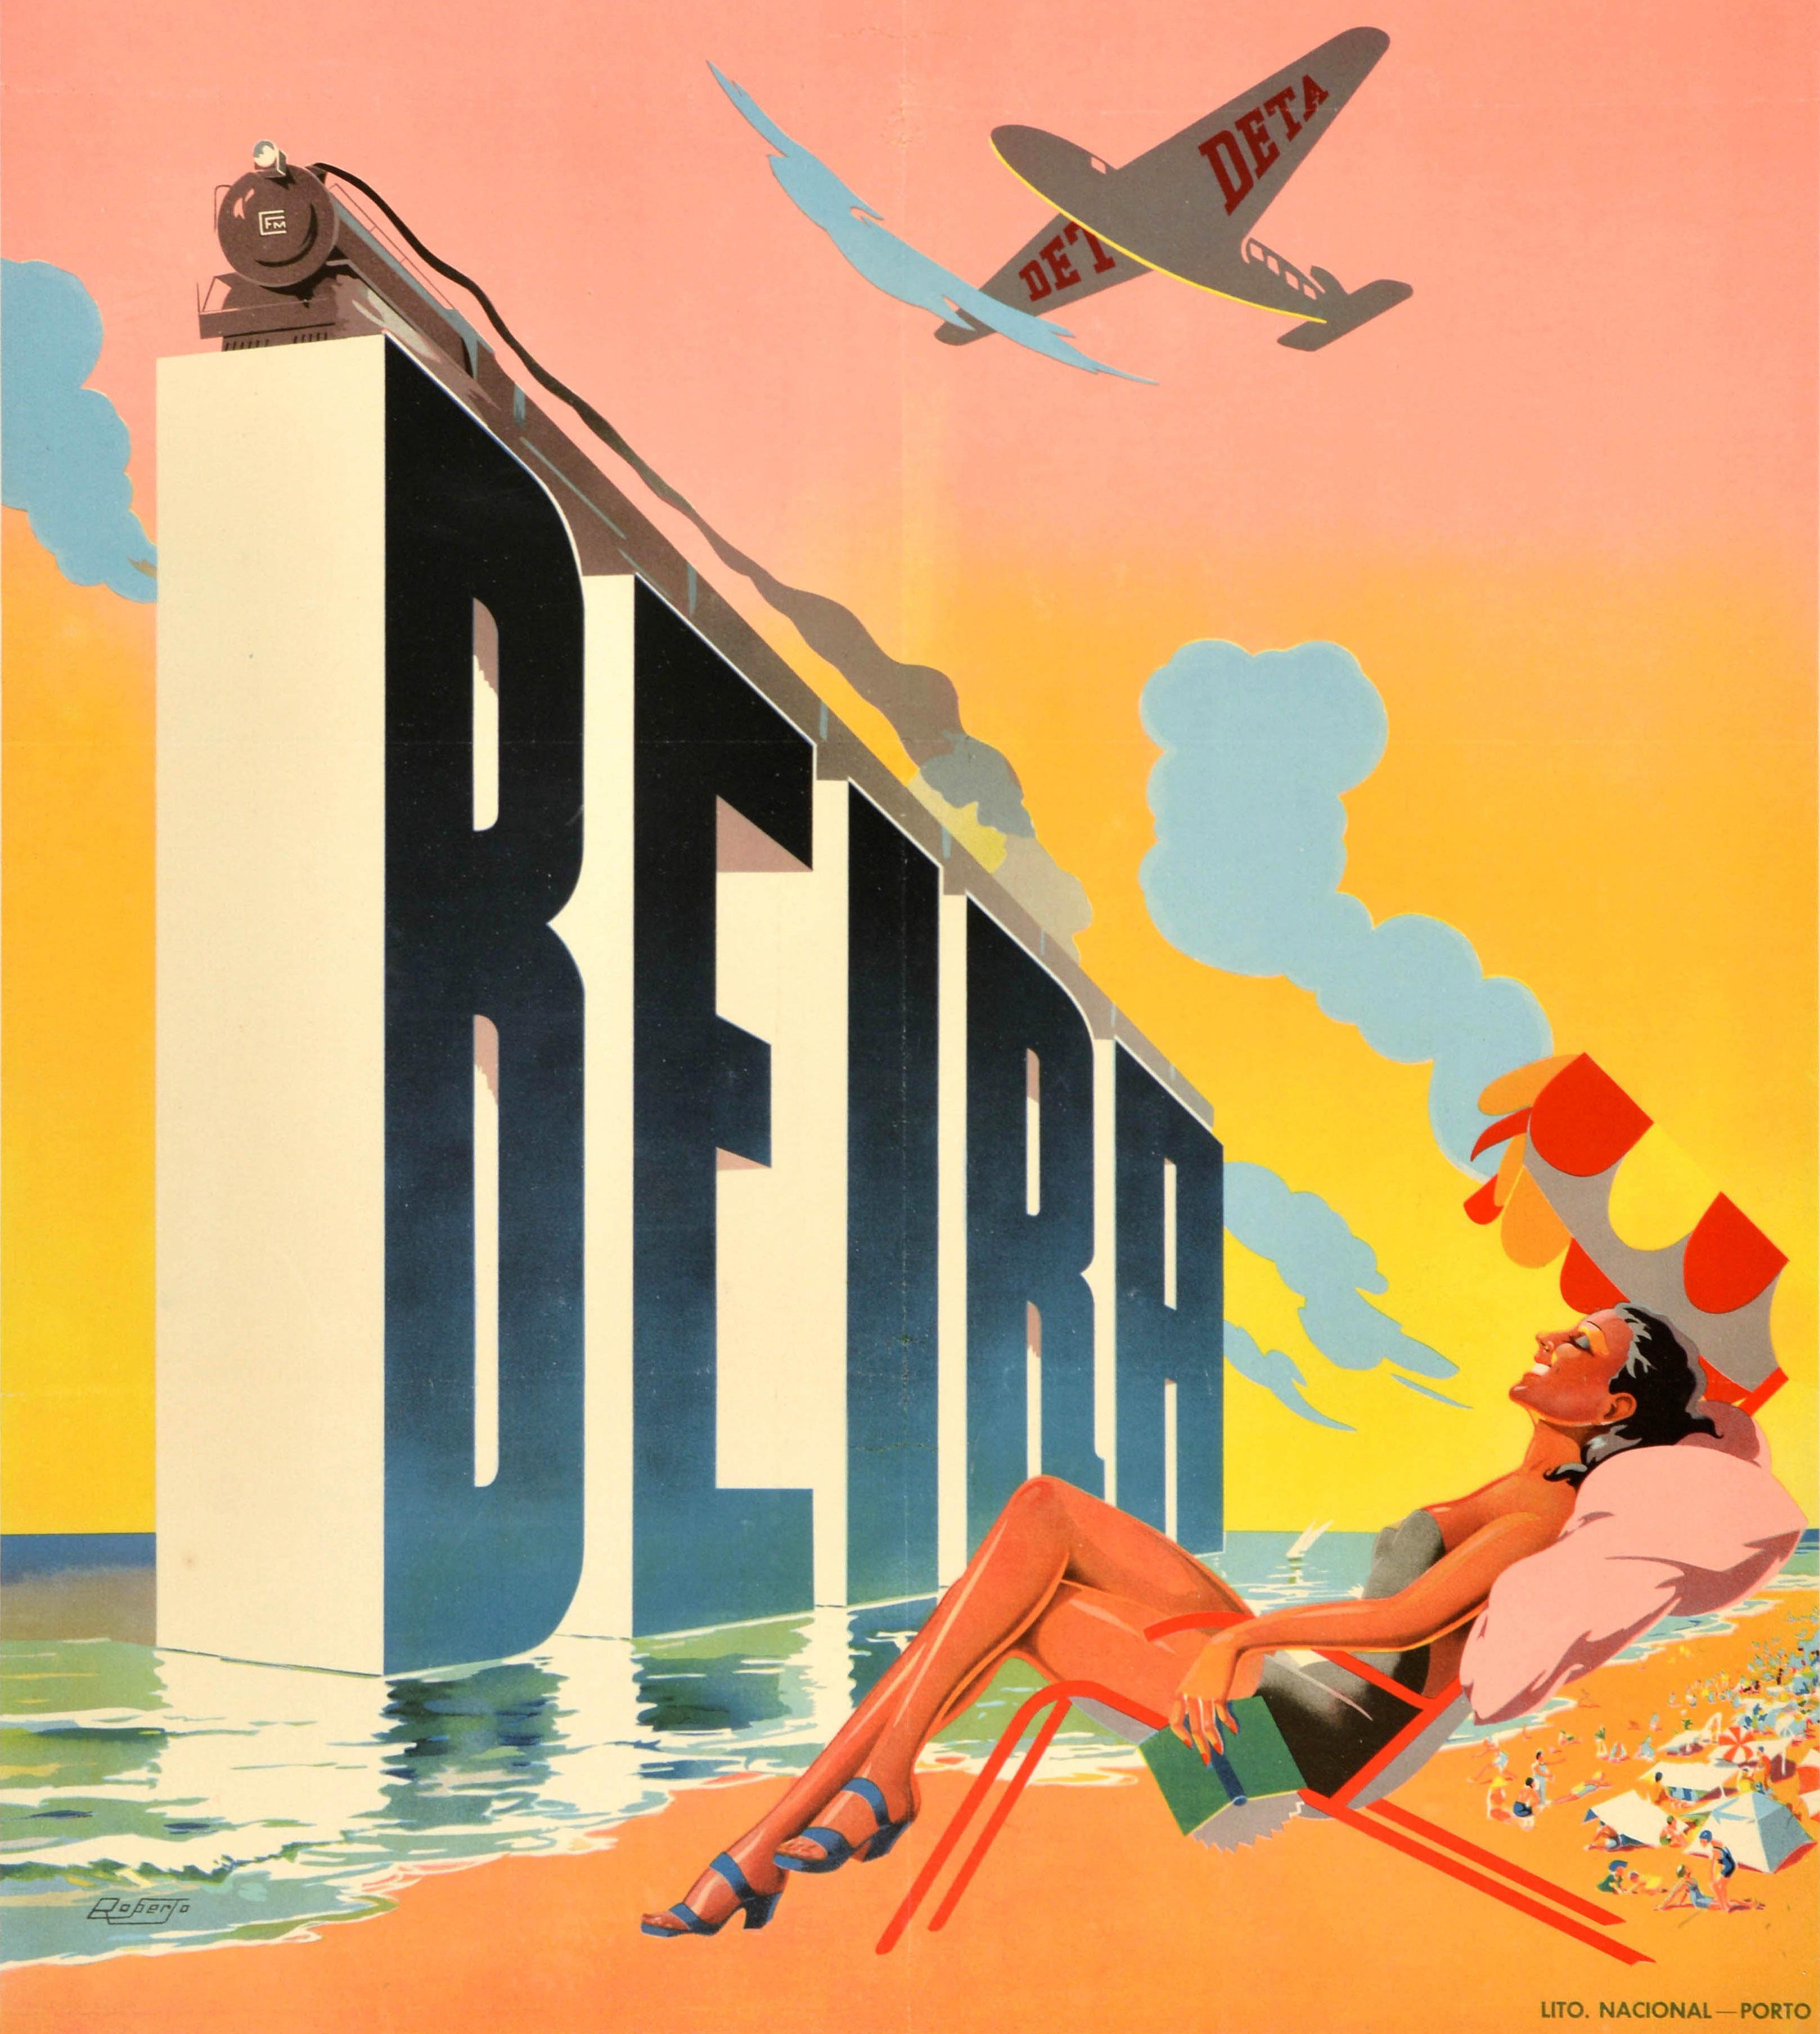 Mid-20th Century Original Vintage Africa Travel Poster Beira Portugal Mozambique DETA Airlines